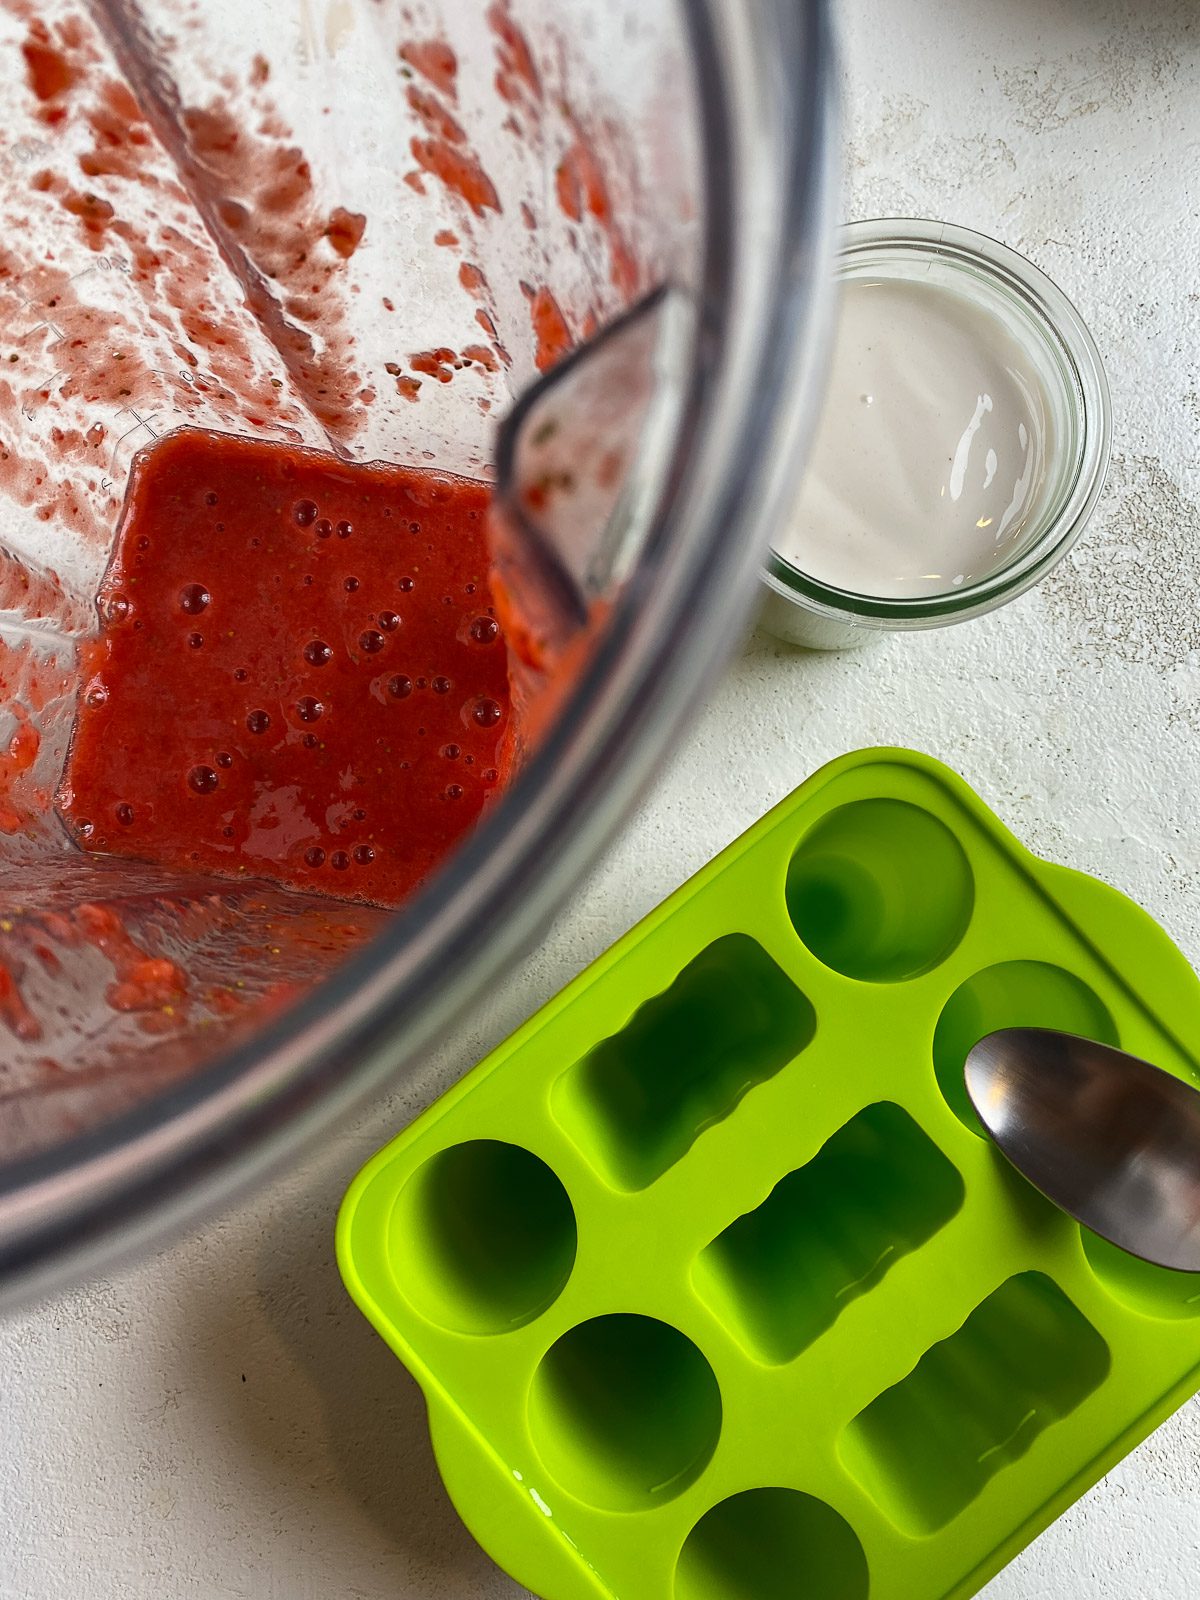 process of adding strawberry mixture to popsicle molds